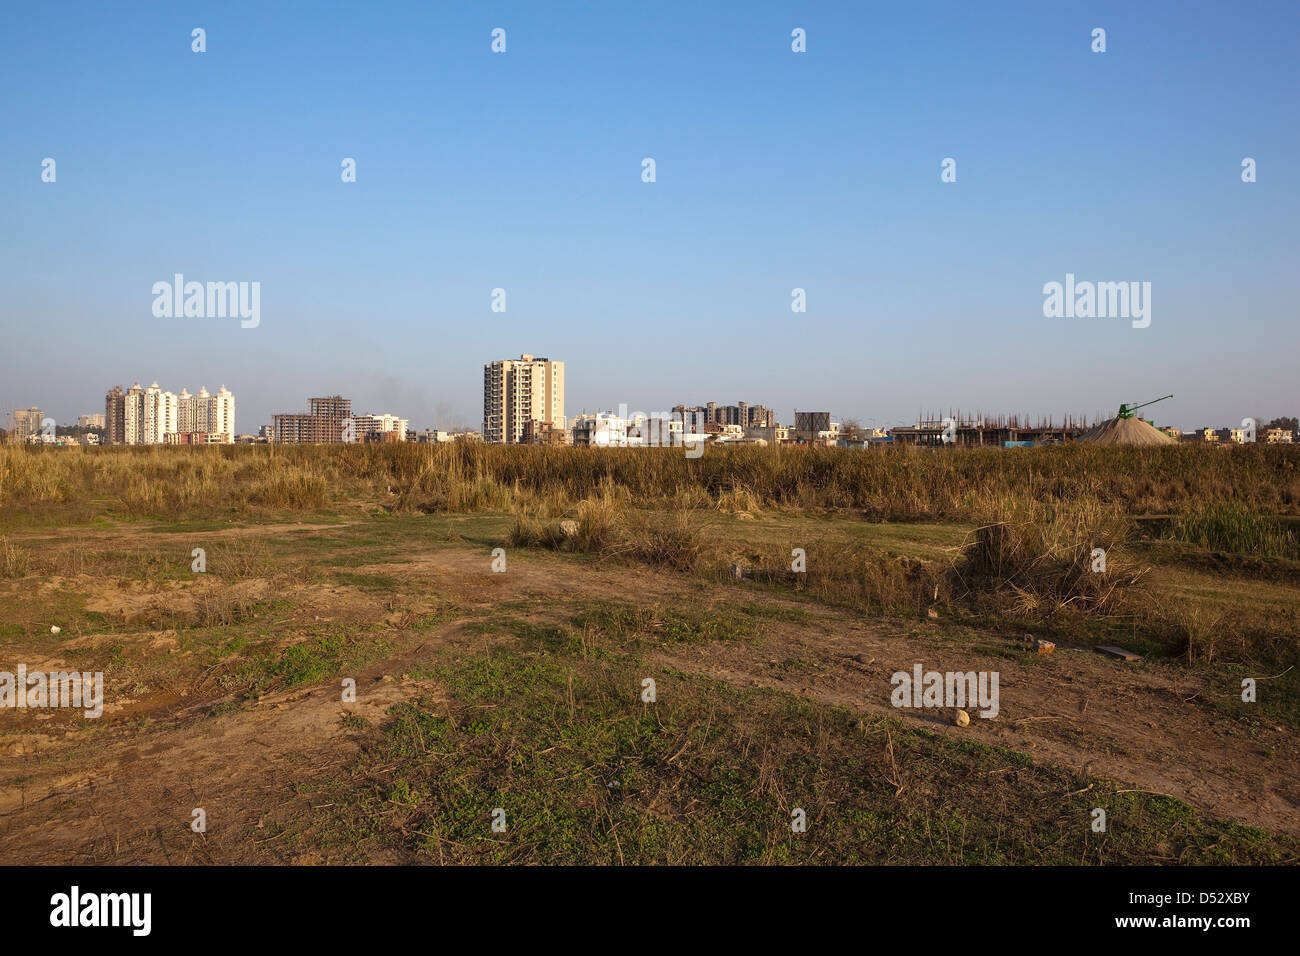 Urban development on former agricultural land on the outskirts of Chandigarh in the district of Mohali, Punjab India Stock Photo